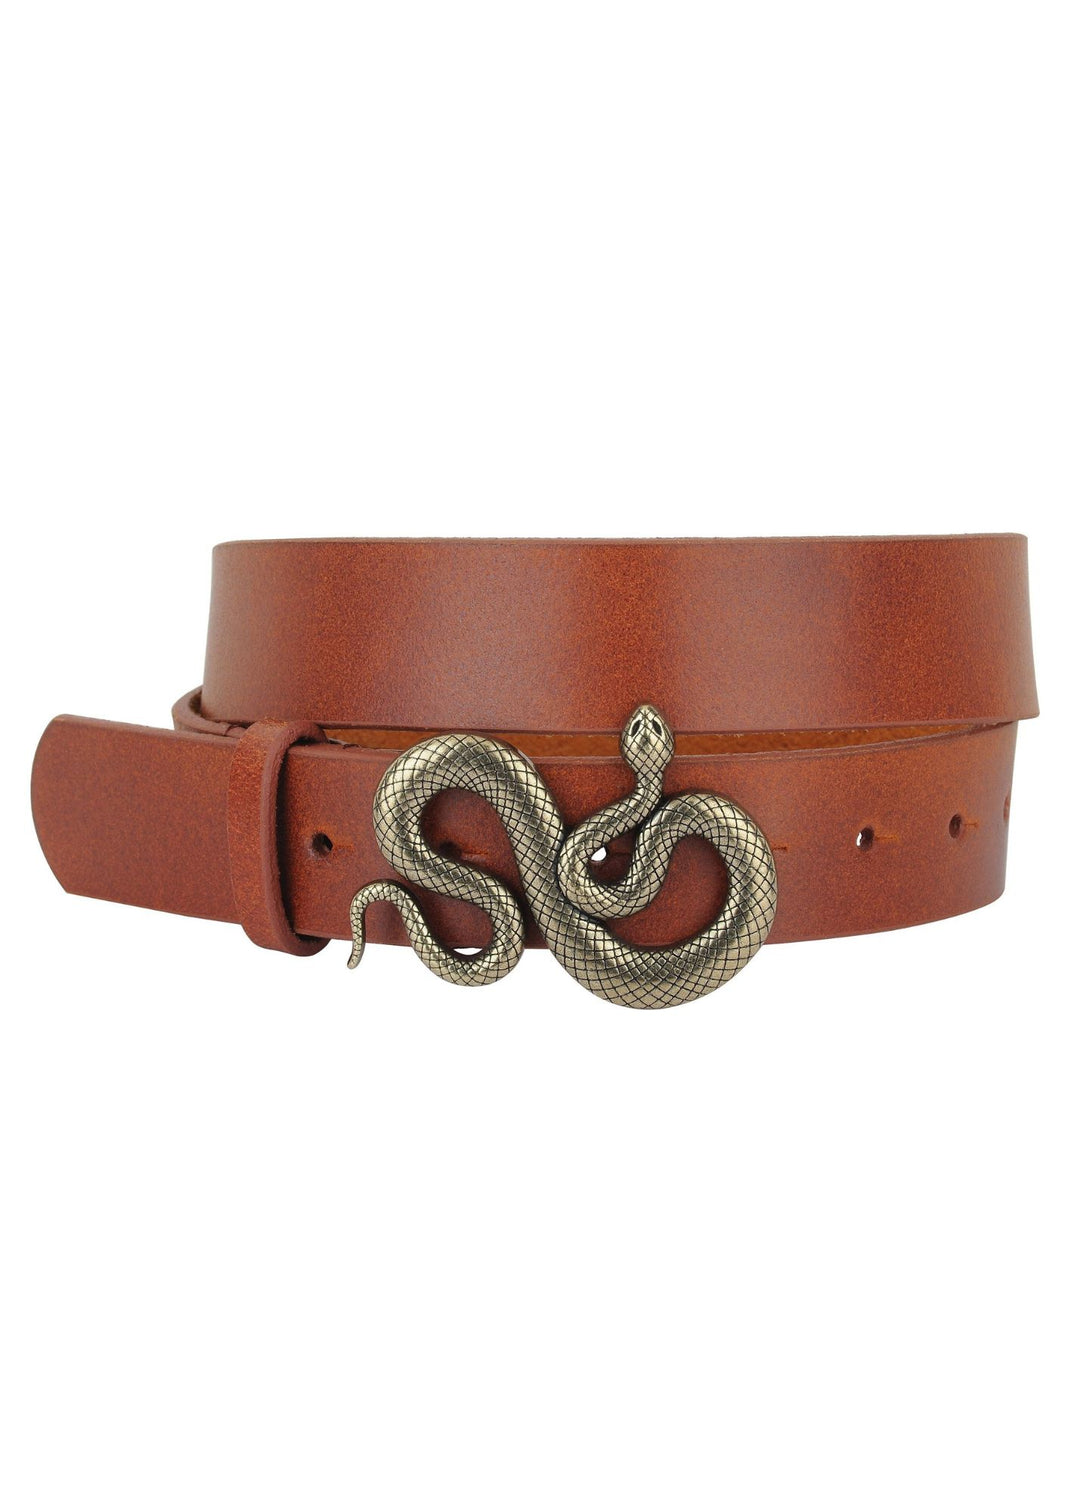 Most Wanted Snake Buckle Leather Belt (Tan)